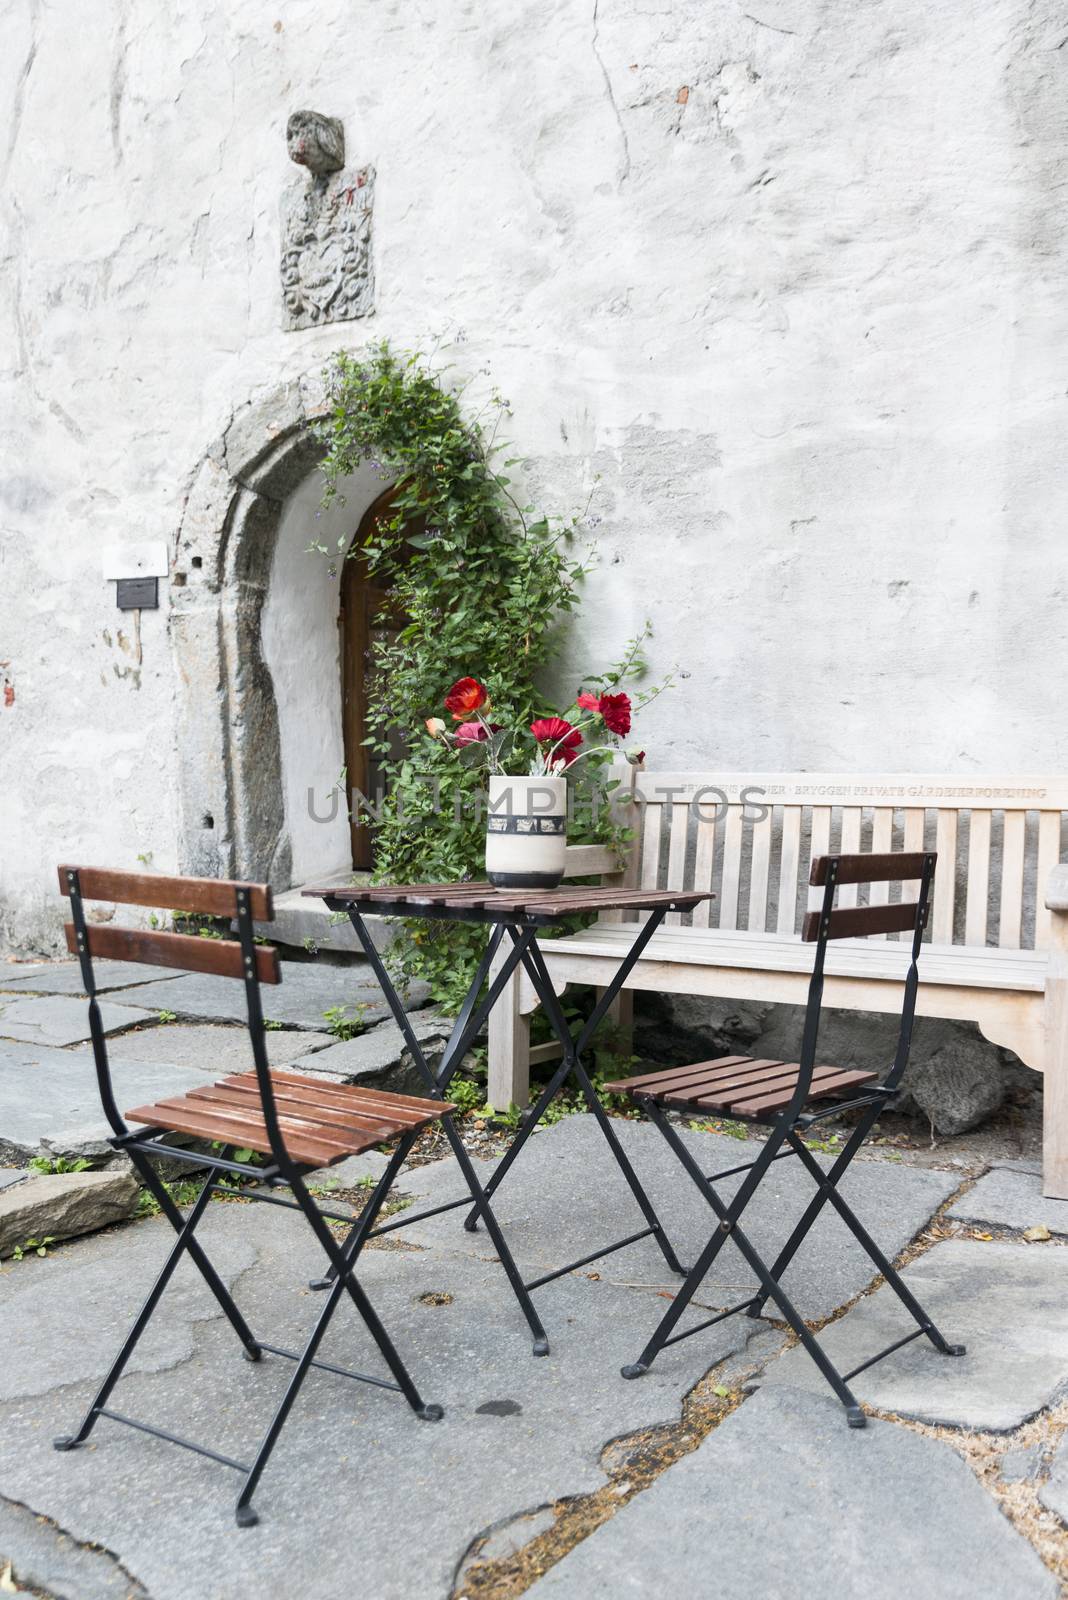 old terrace in bergen norway with red flowers and table and chairs in front of old wall with bow entrance